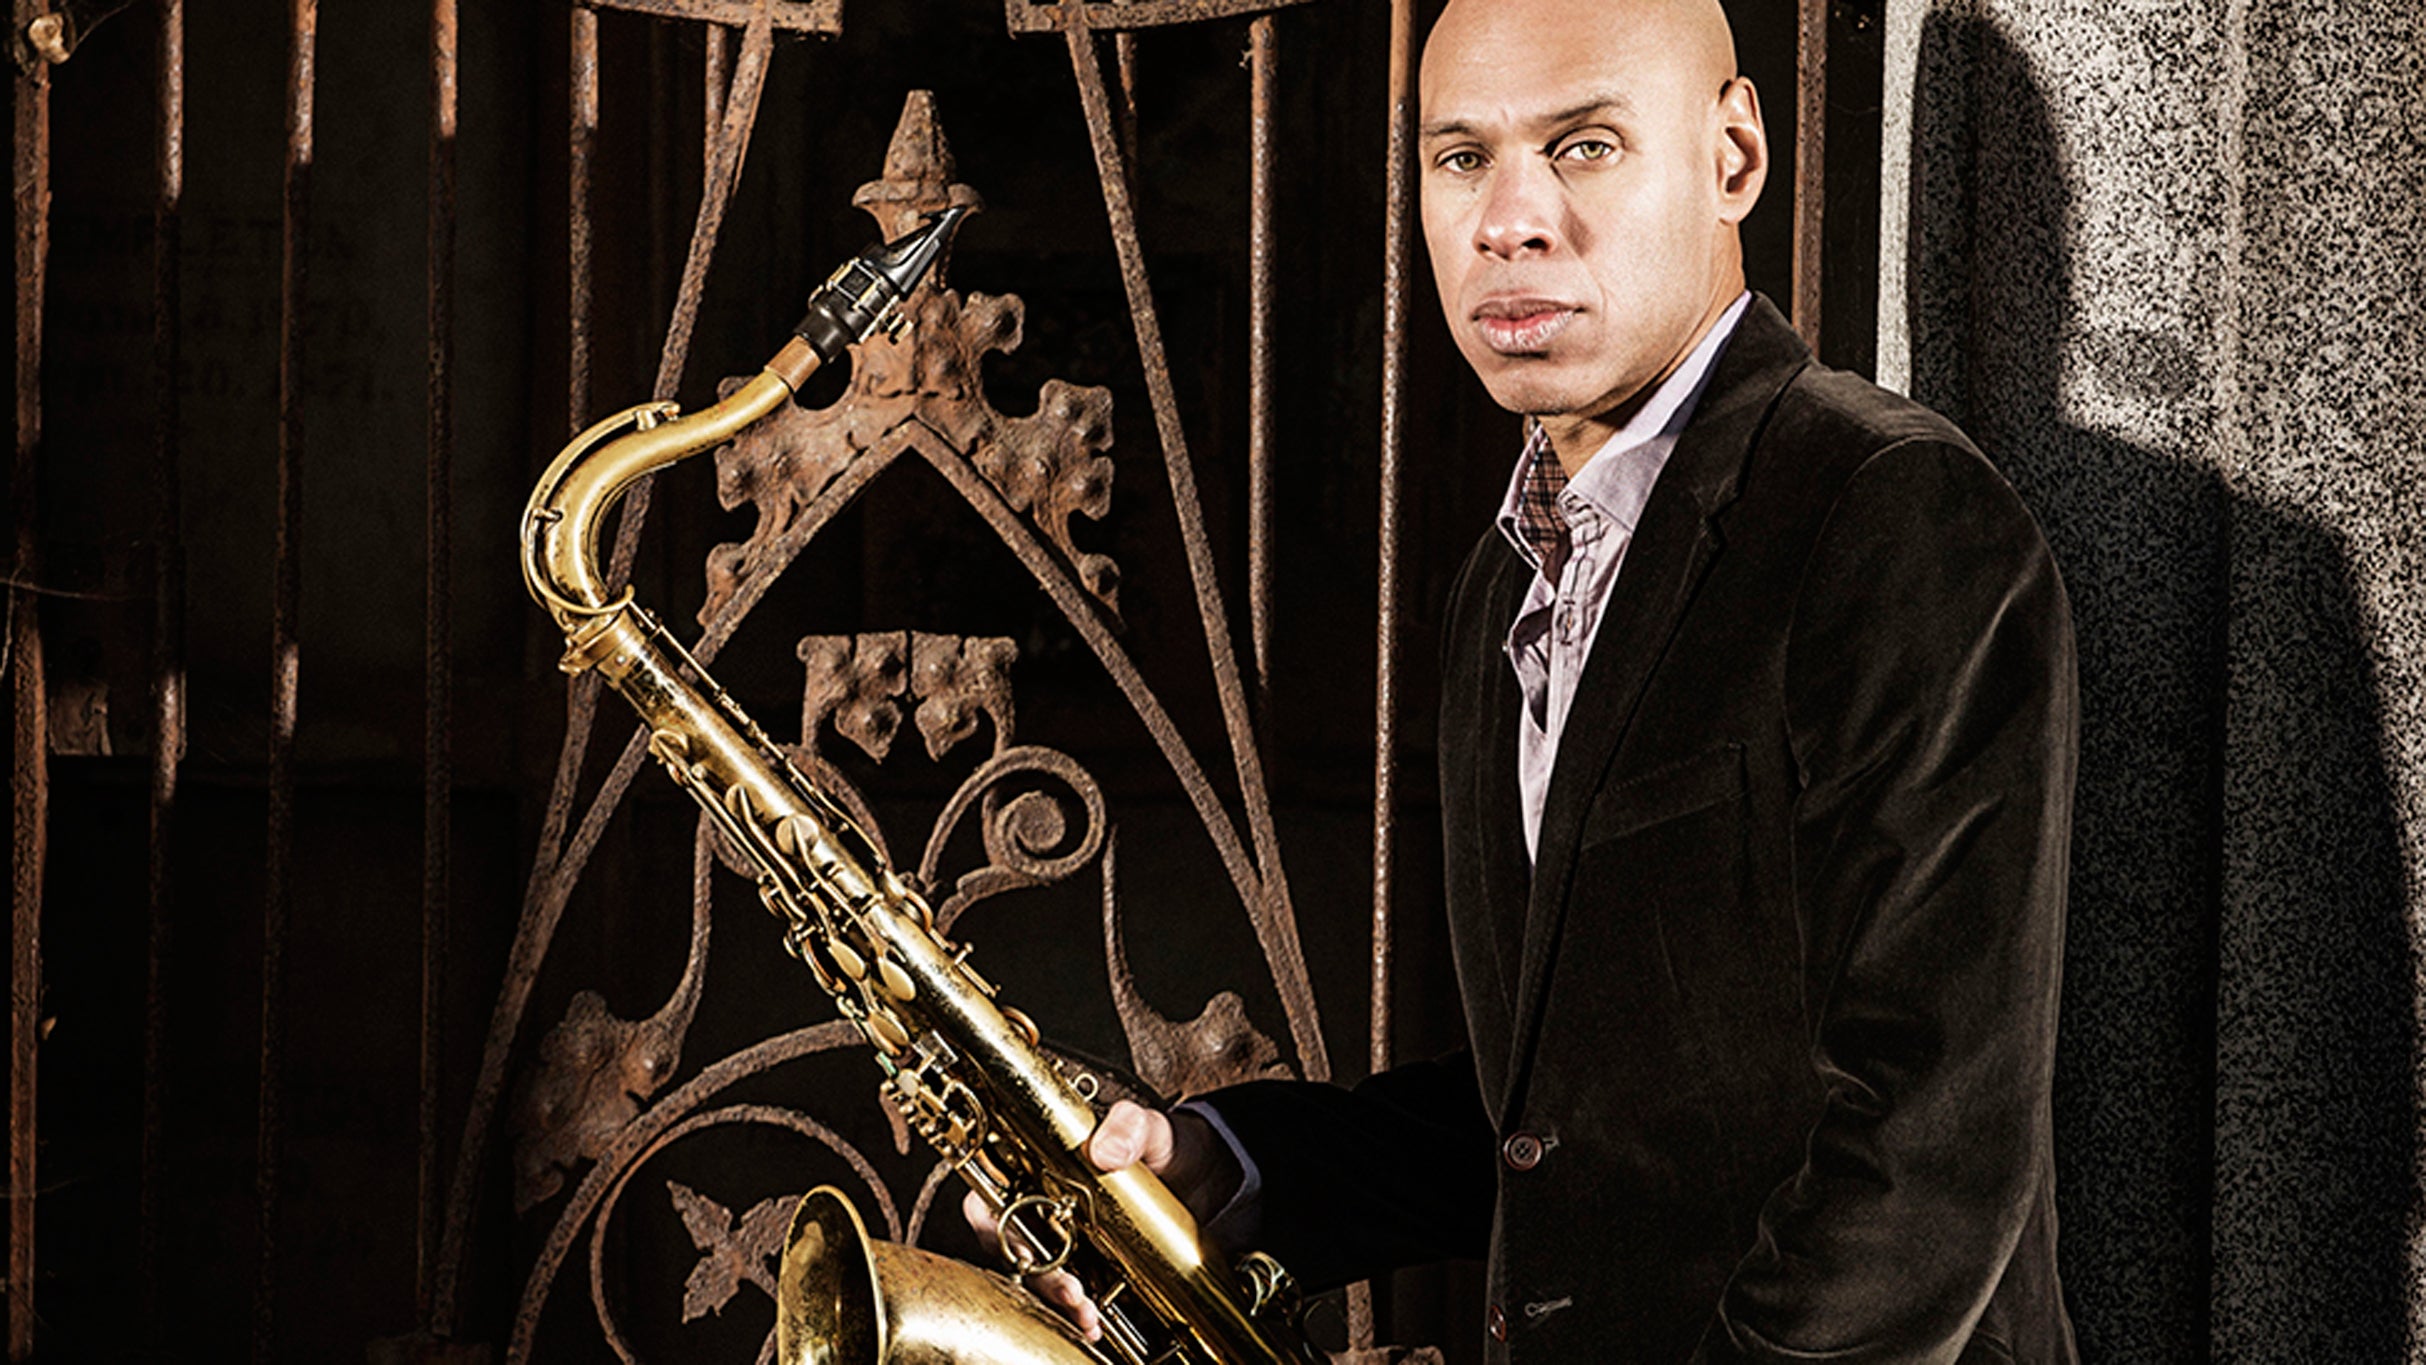 Joshua Redman Group featuring Gabrielle Cavassa "Where Are We" Tour in Portsmouth promo photo for Patron Circle presale offer code